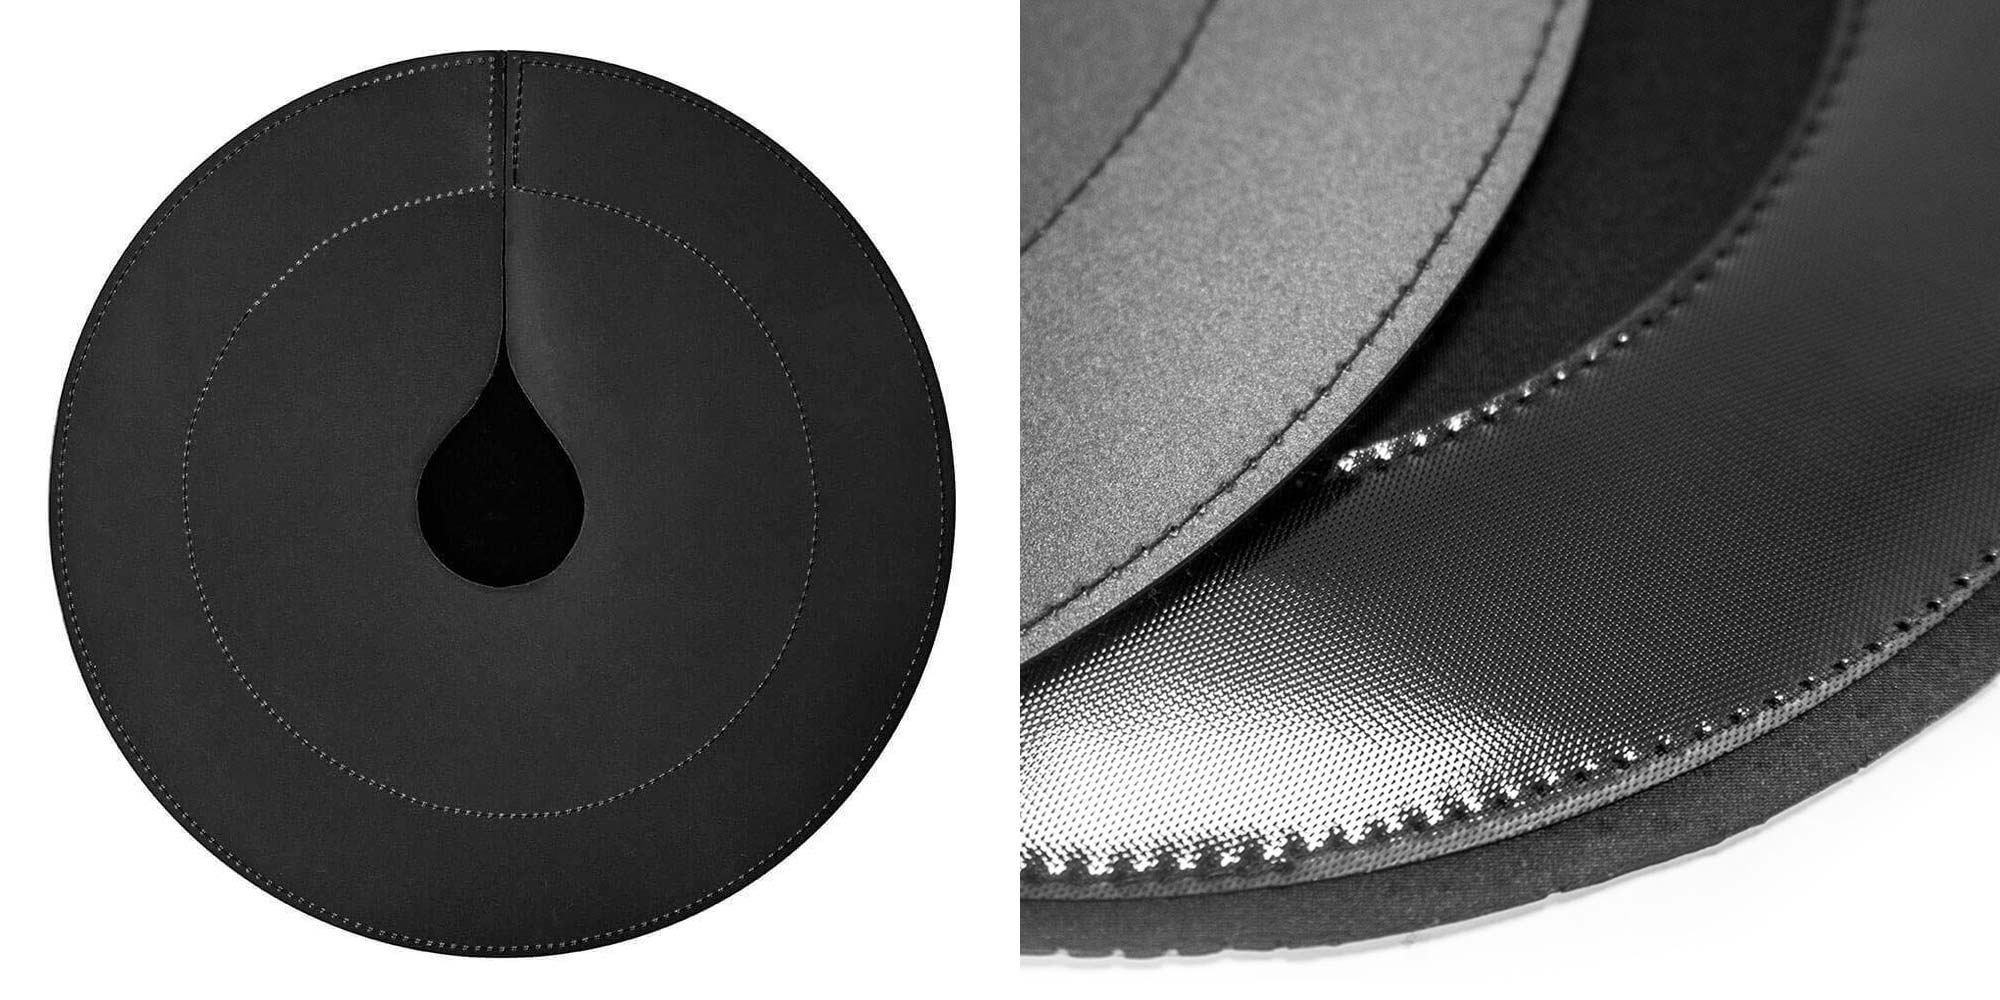 Muc-Off neoprene Disc Brake Covers for cleaning & transport